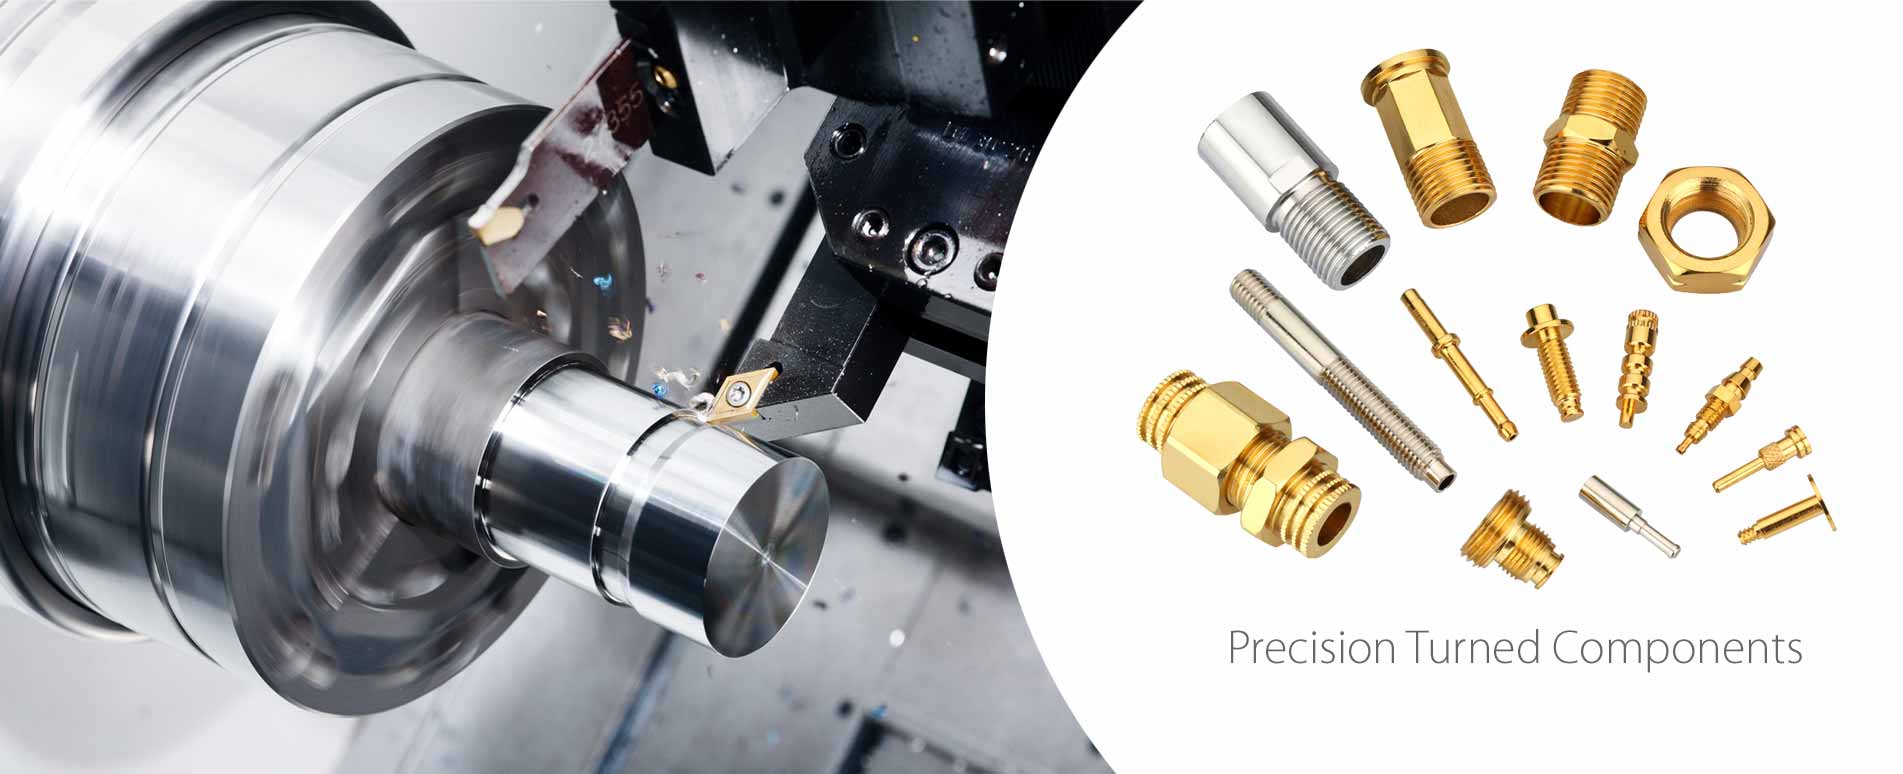 Brass Precision turned components and fasteners